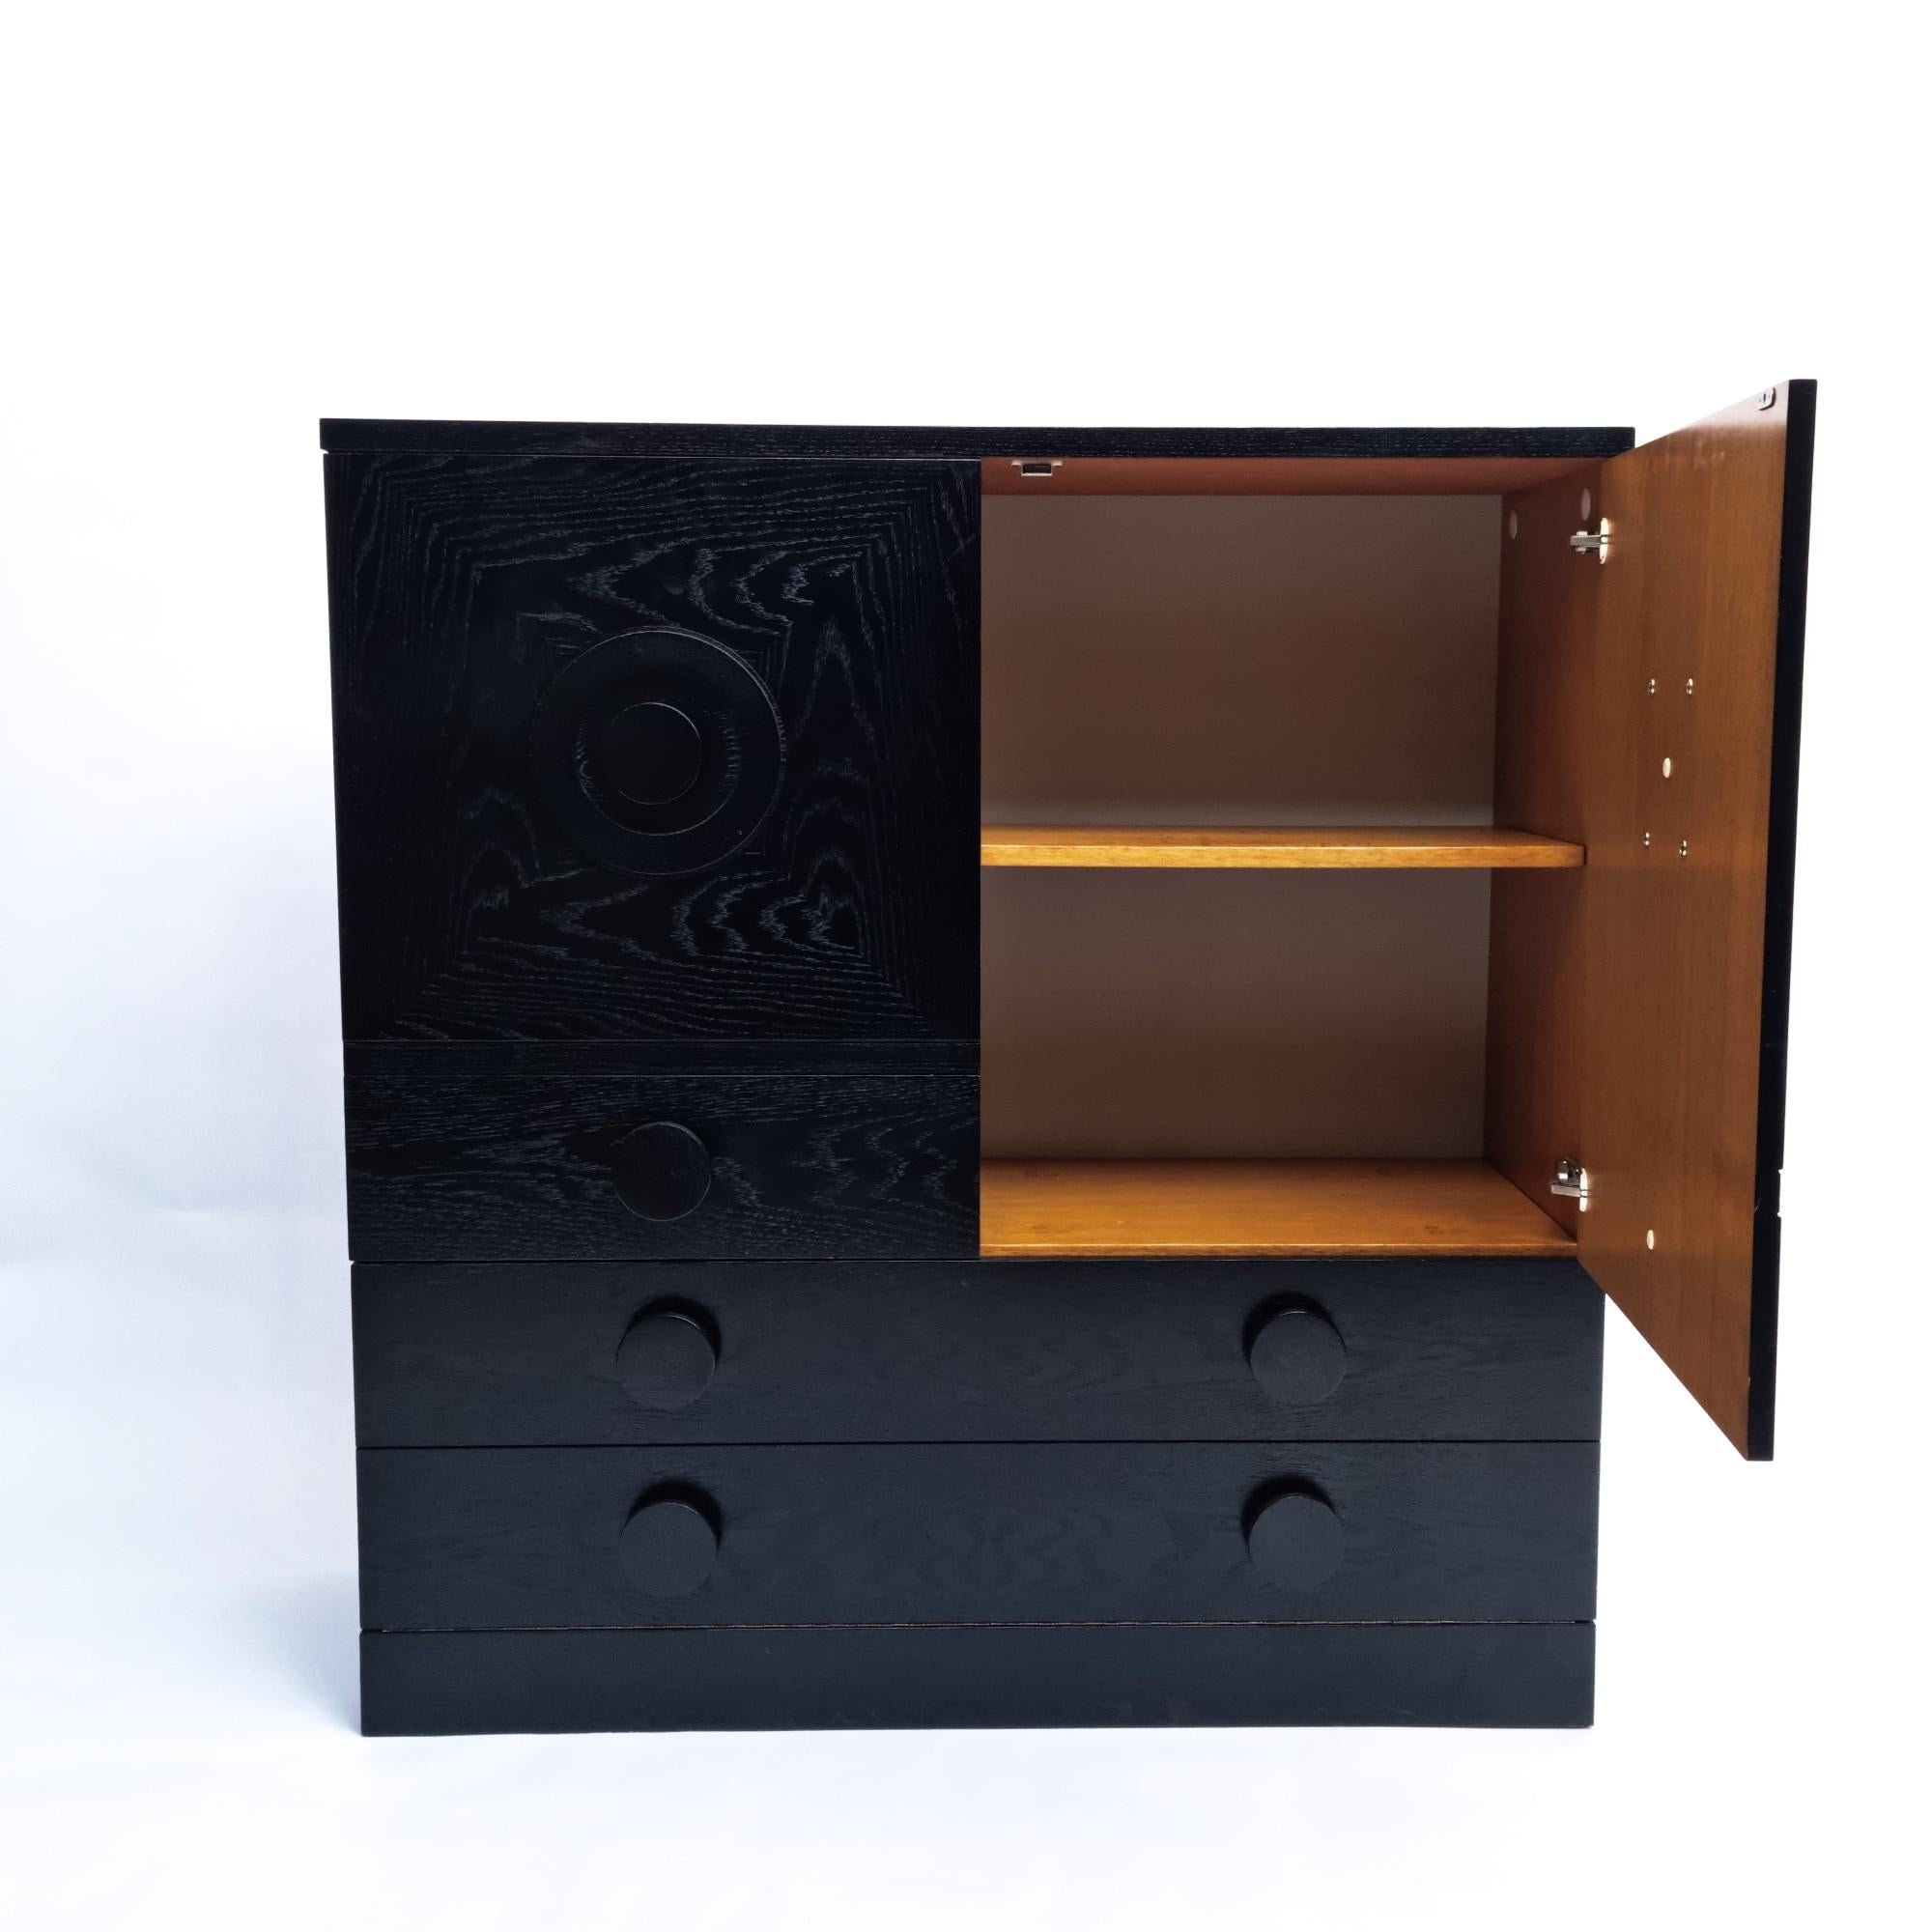 Black Brutalist bar cabinet in black lacquered oak, Belgium 1970s.

Sideboard features three graphic patterned doors. It provides plenty of storage which makes it both very functional and decorative. These cabinets are often attributed to Belgian